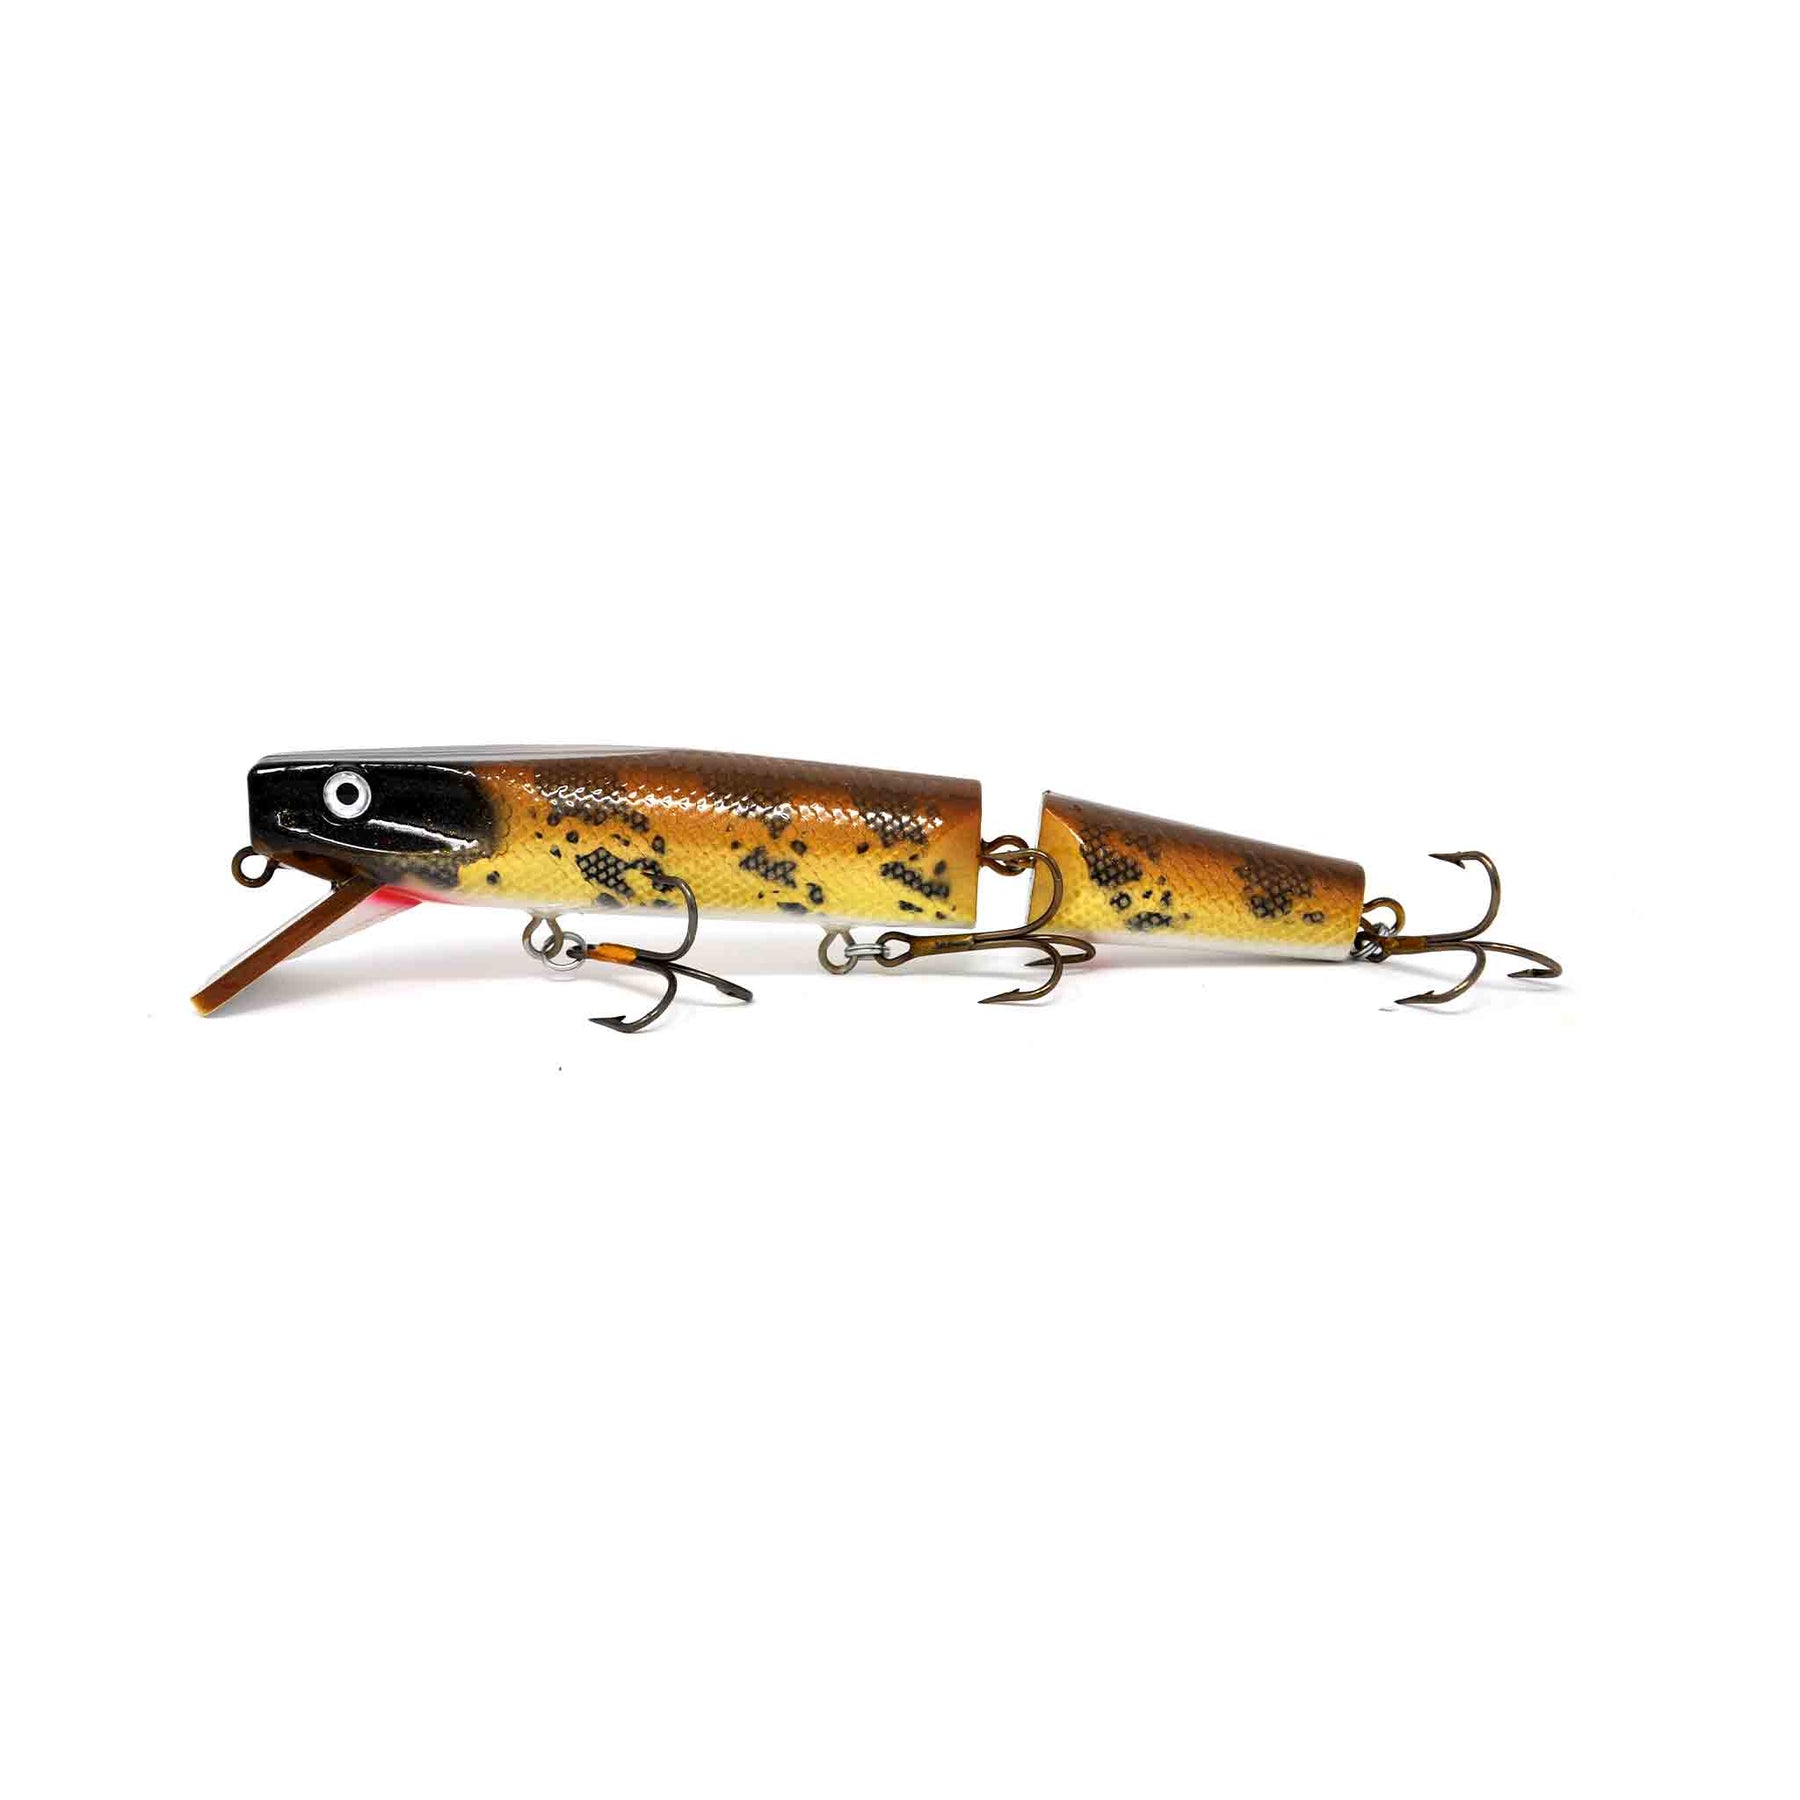 6) Musky Fishing Lures with Case